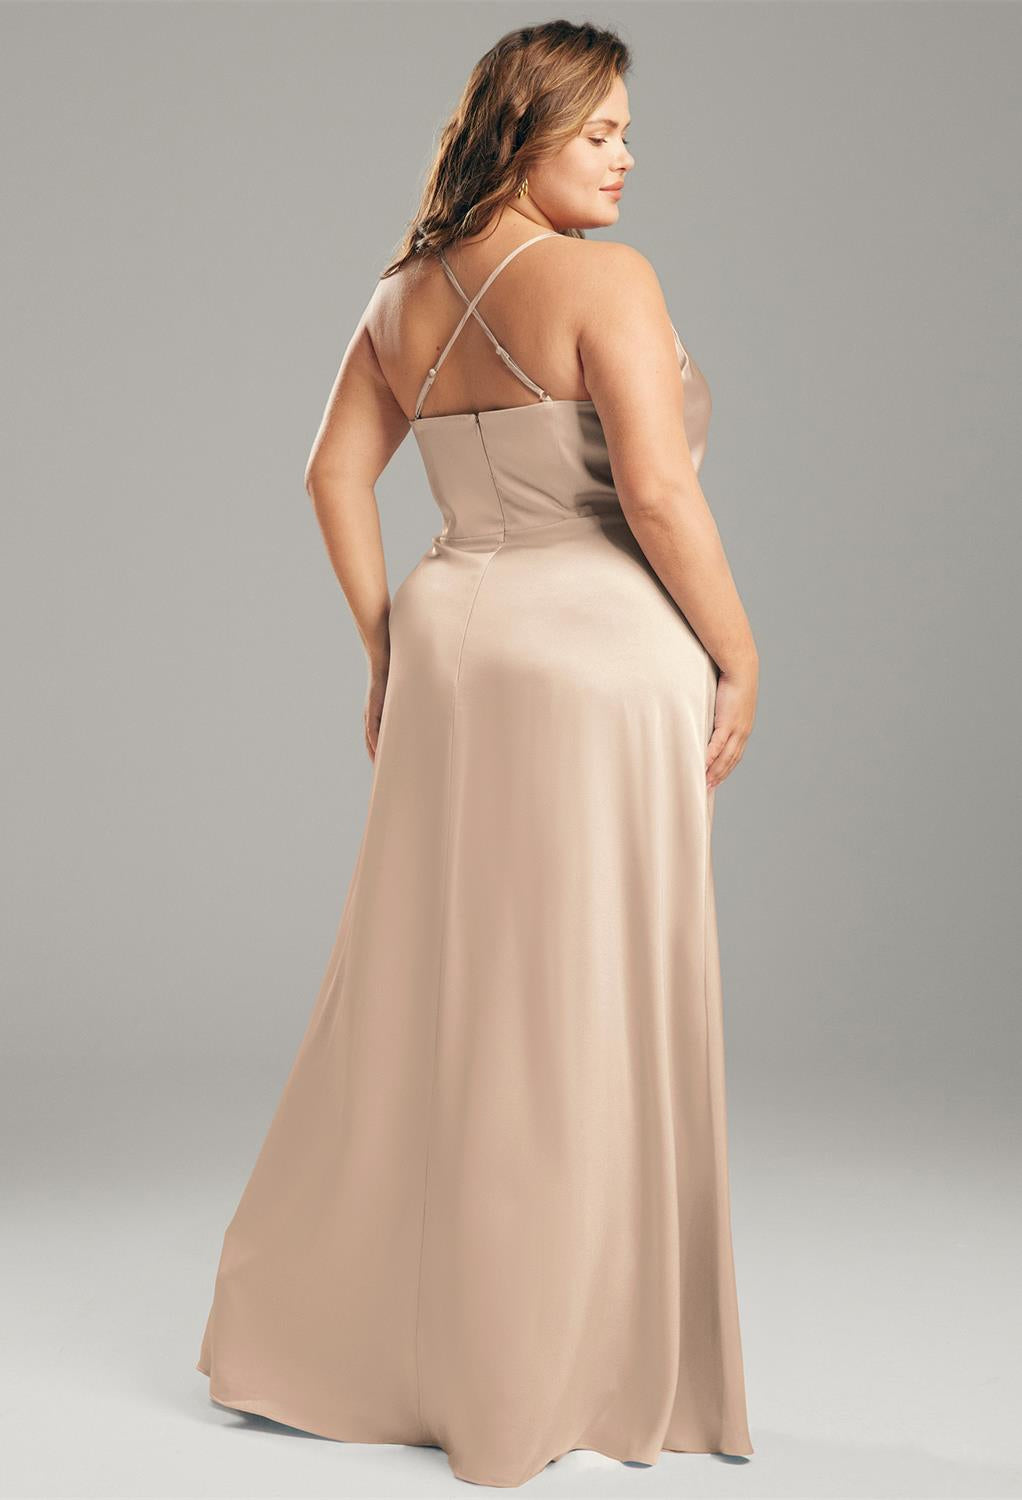 The back view of a Kora - Satin Charmeuse Bridesmaid Dress - Off The Rack in a beige gown at Bergamot Bridal in London.